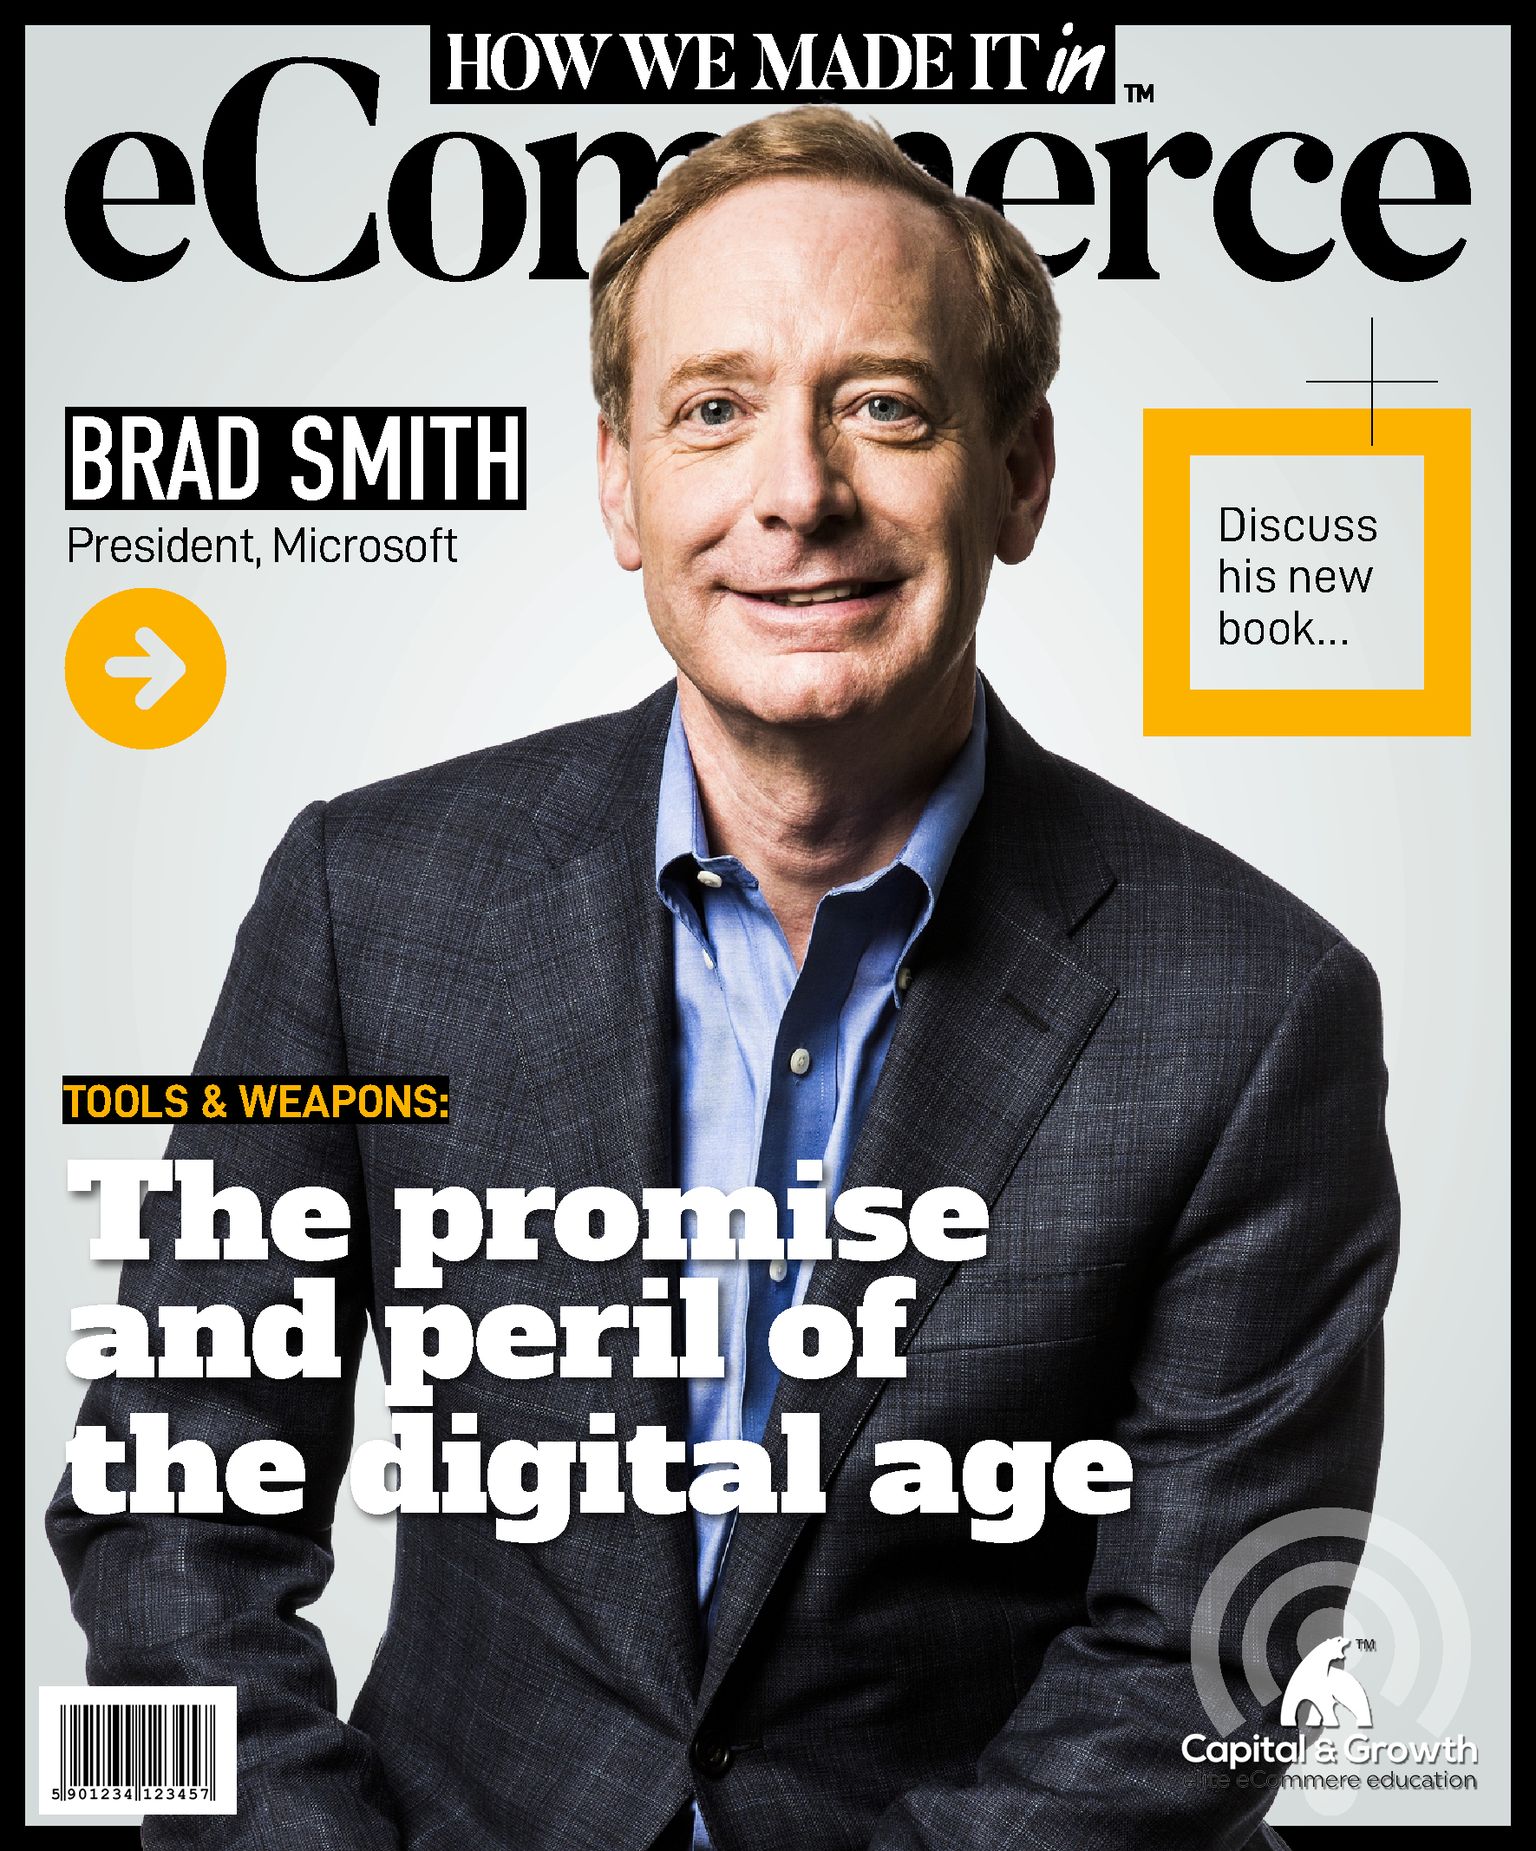 Microsoft President, Brad Smith: Why We Urgently Need a Hippocratic Oath for Software Engineers